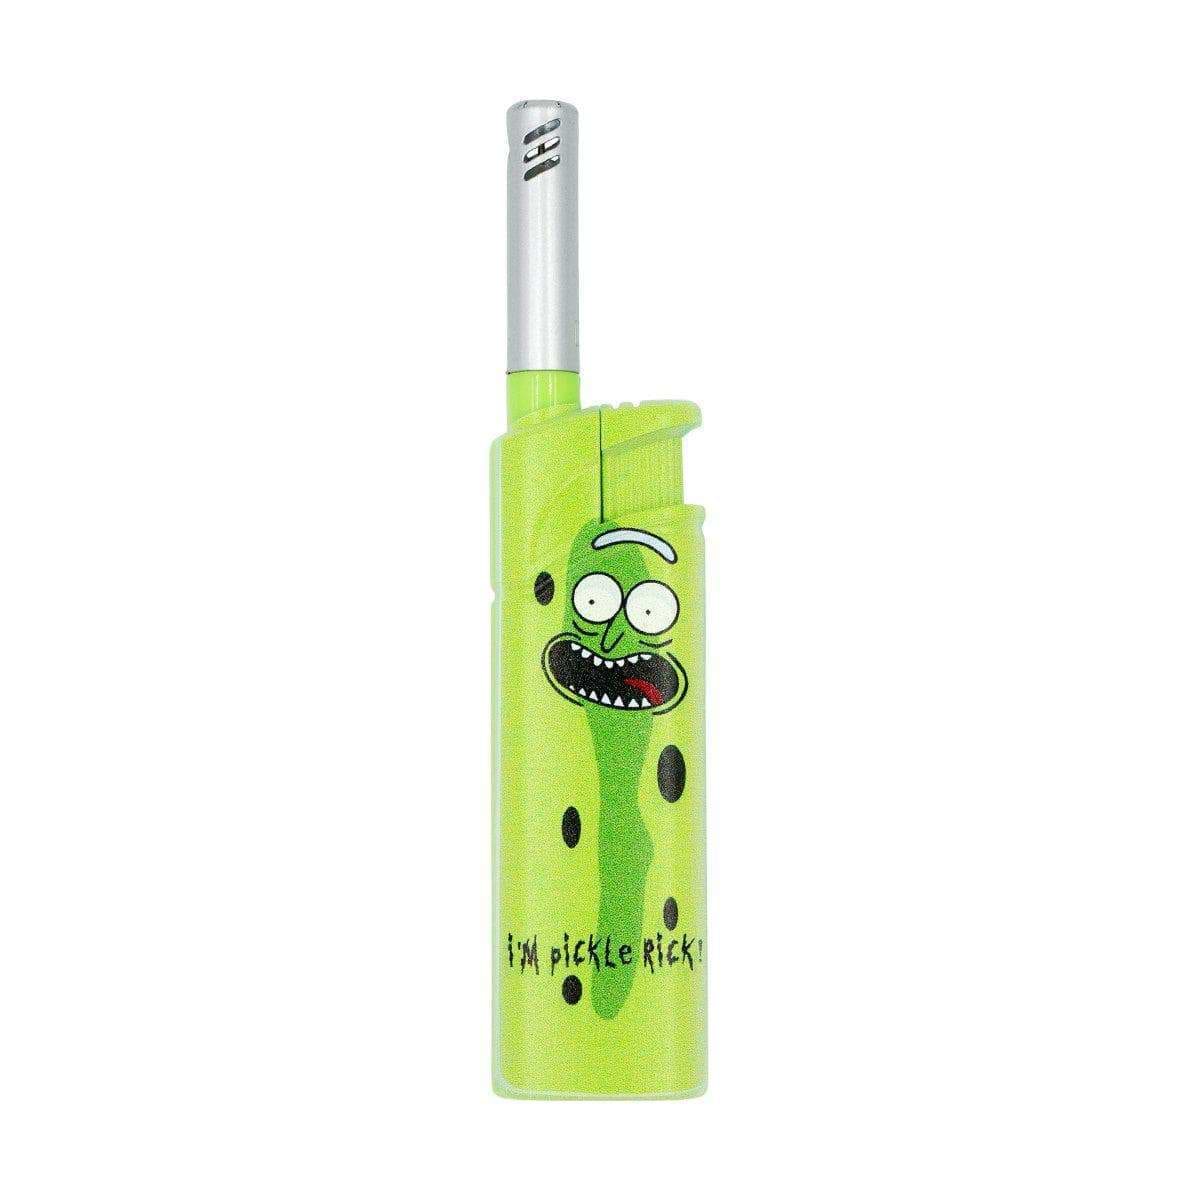 Compact classic shape torch lighter smoking device accessory with Pickle Rick character design